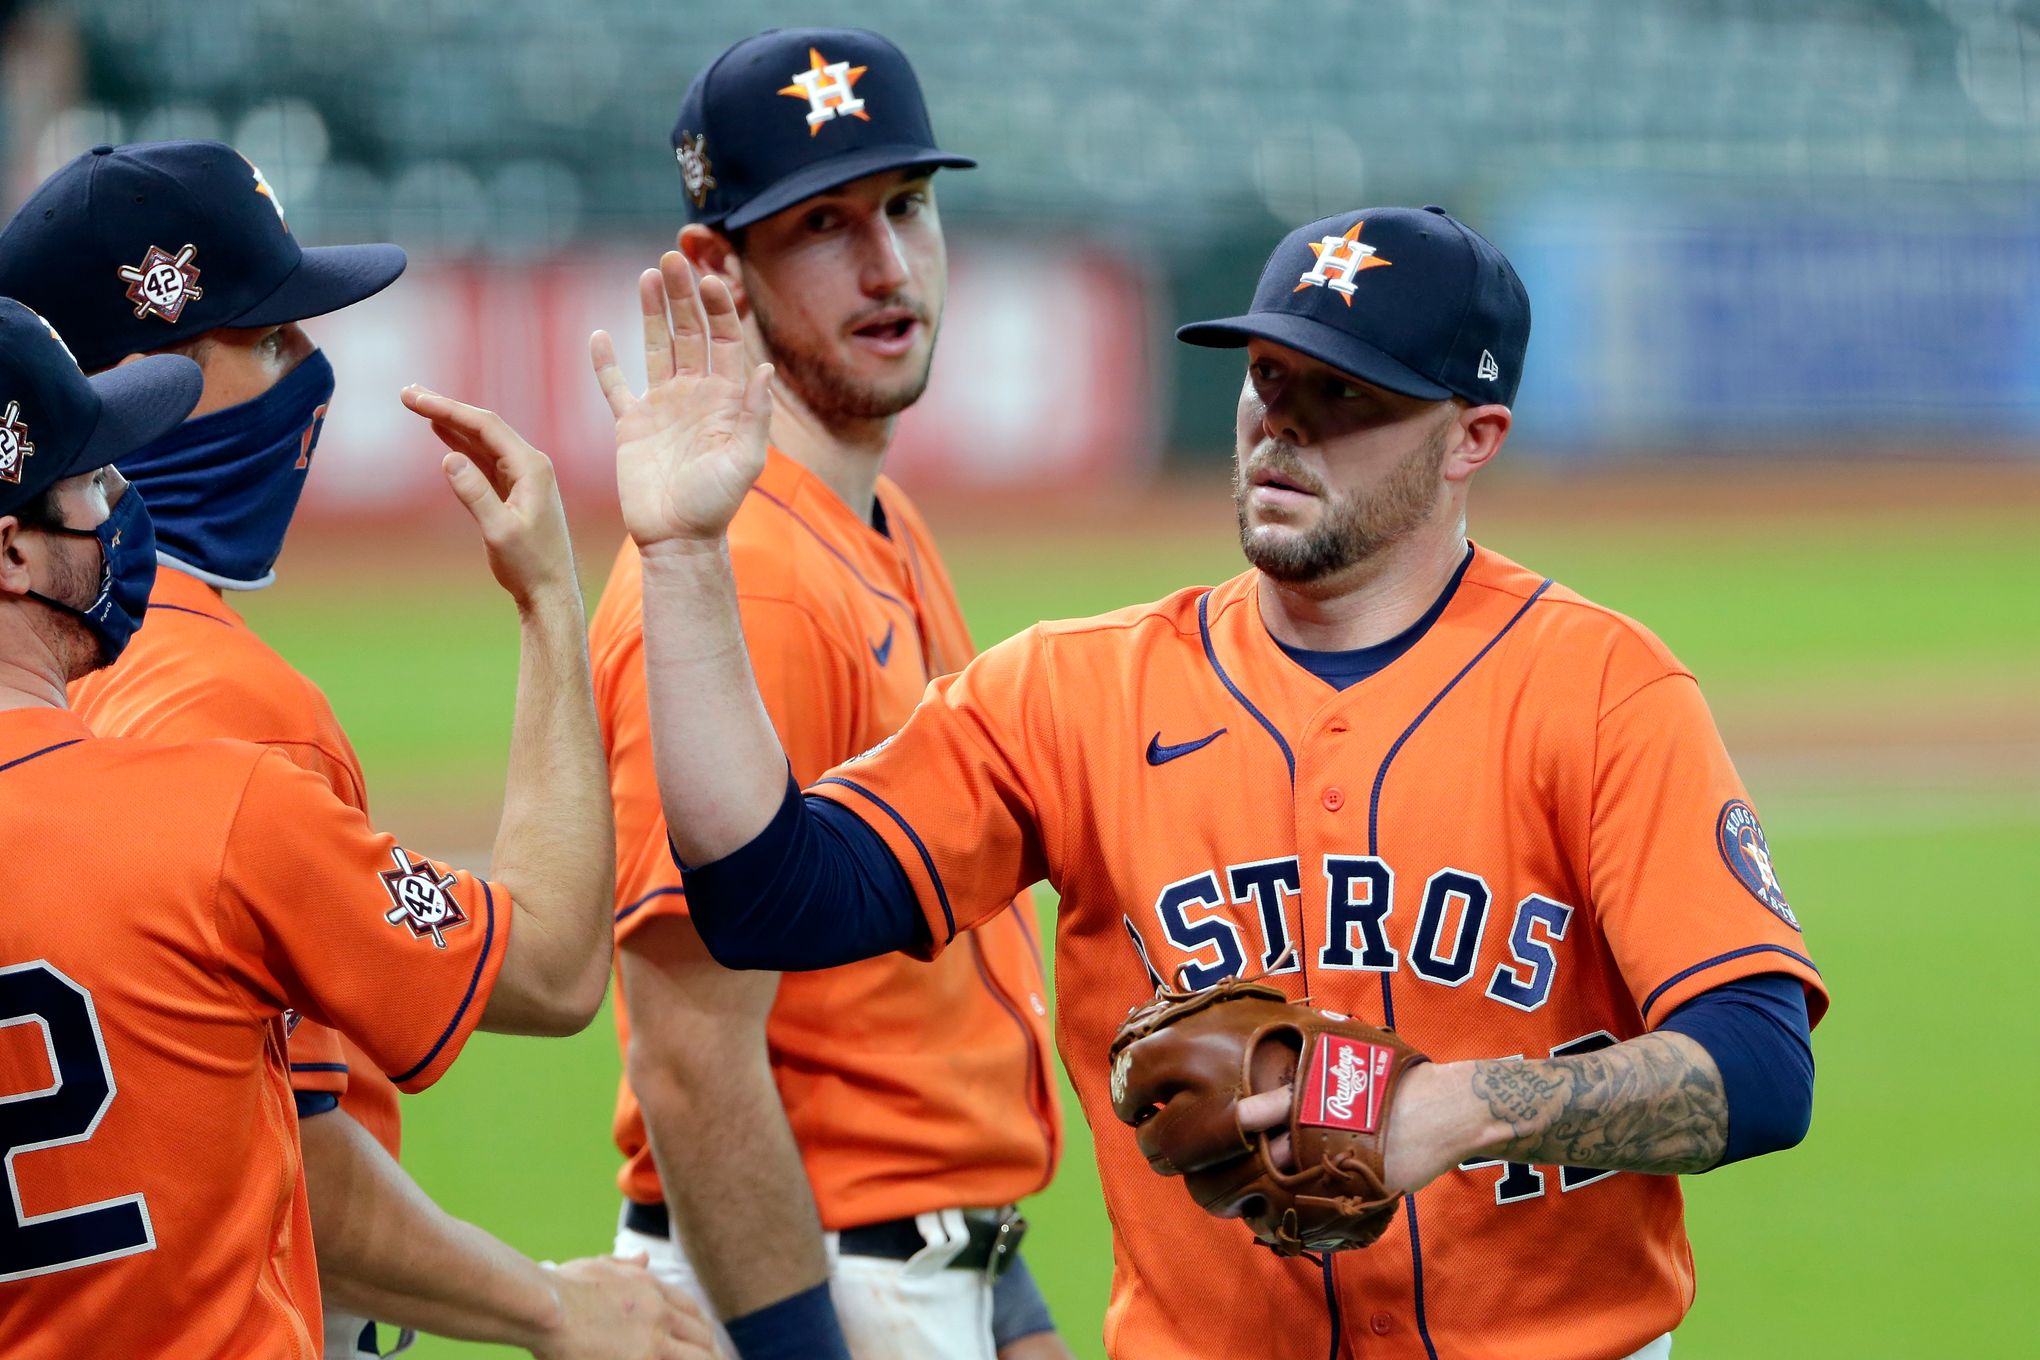 Houston Astros' Kyle Tucker homers to cap four-hit night in PCL